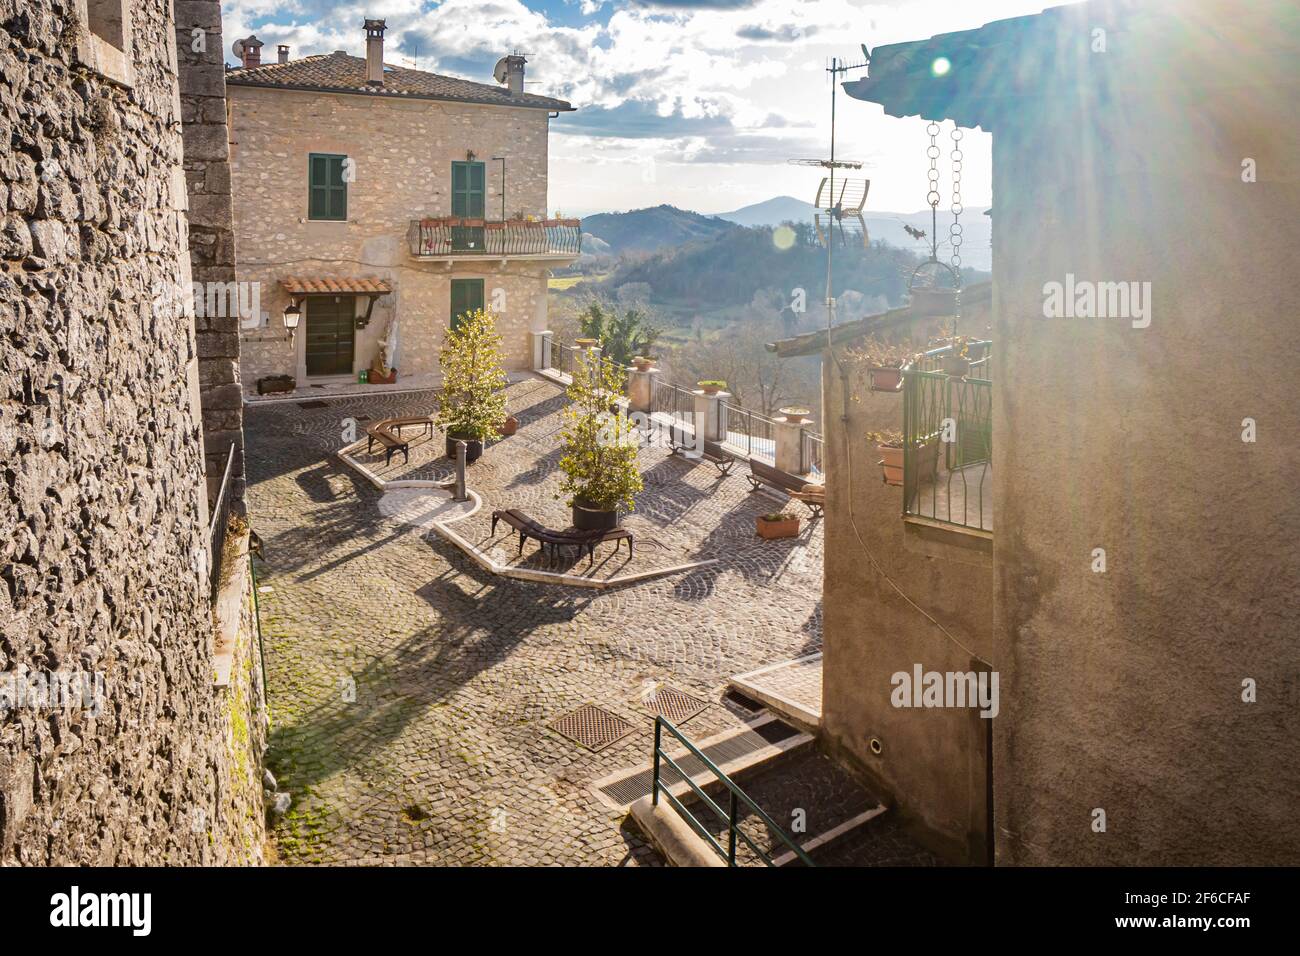 The small medieval village of Capranica Prenestina in Lazio, province of Rome. A small square, with a cobblestone floor, with benches and a fountain, Stock Photo